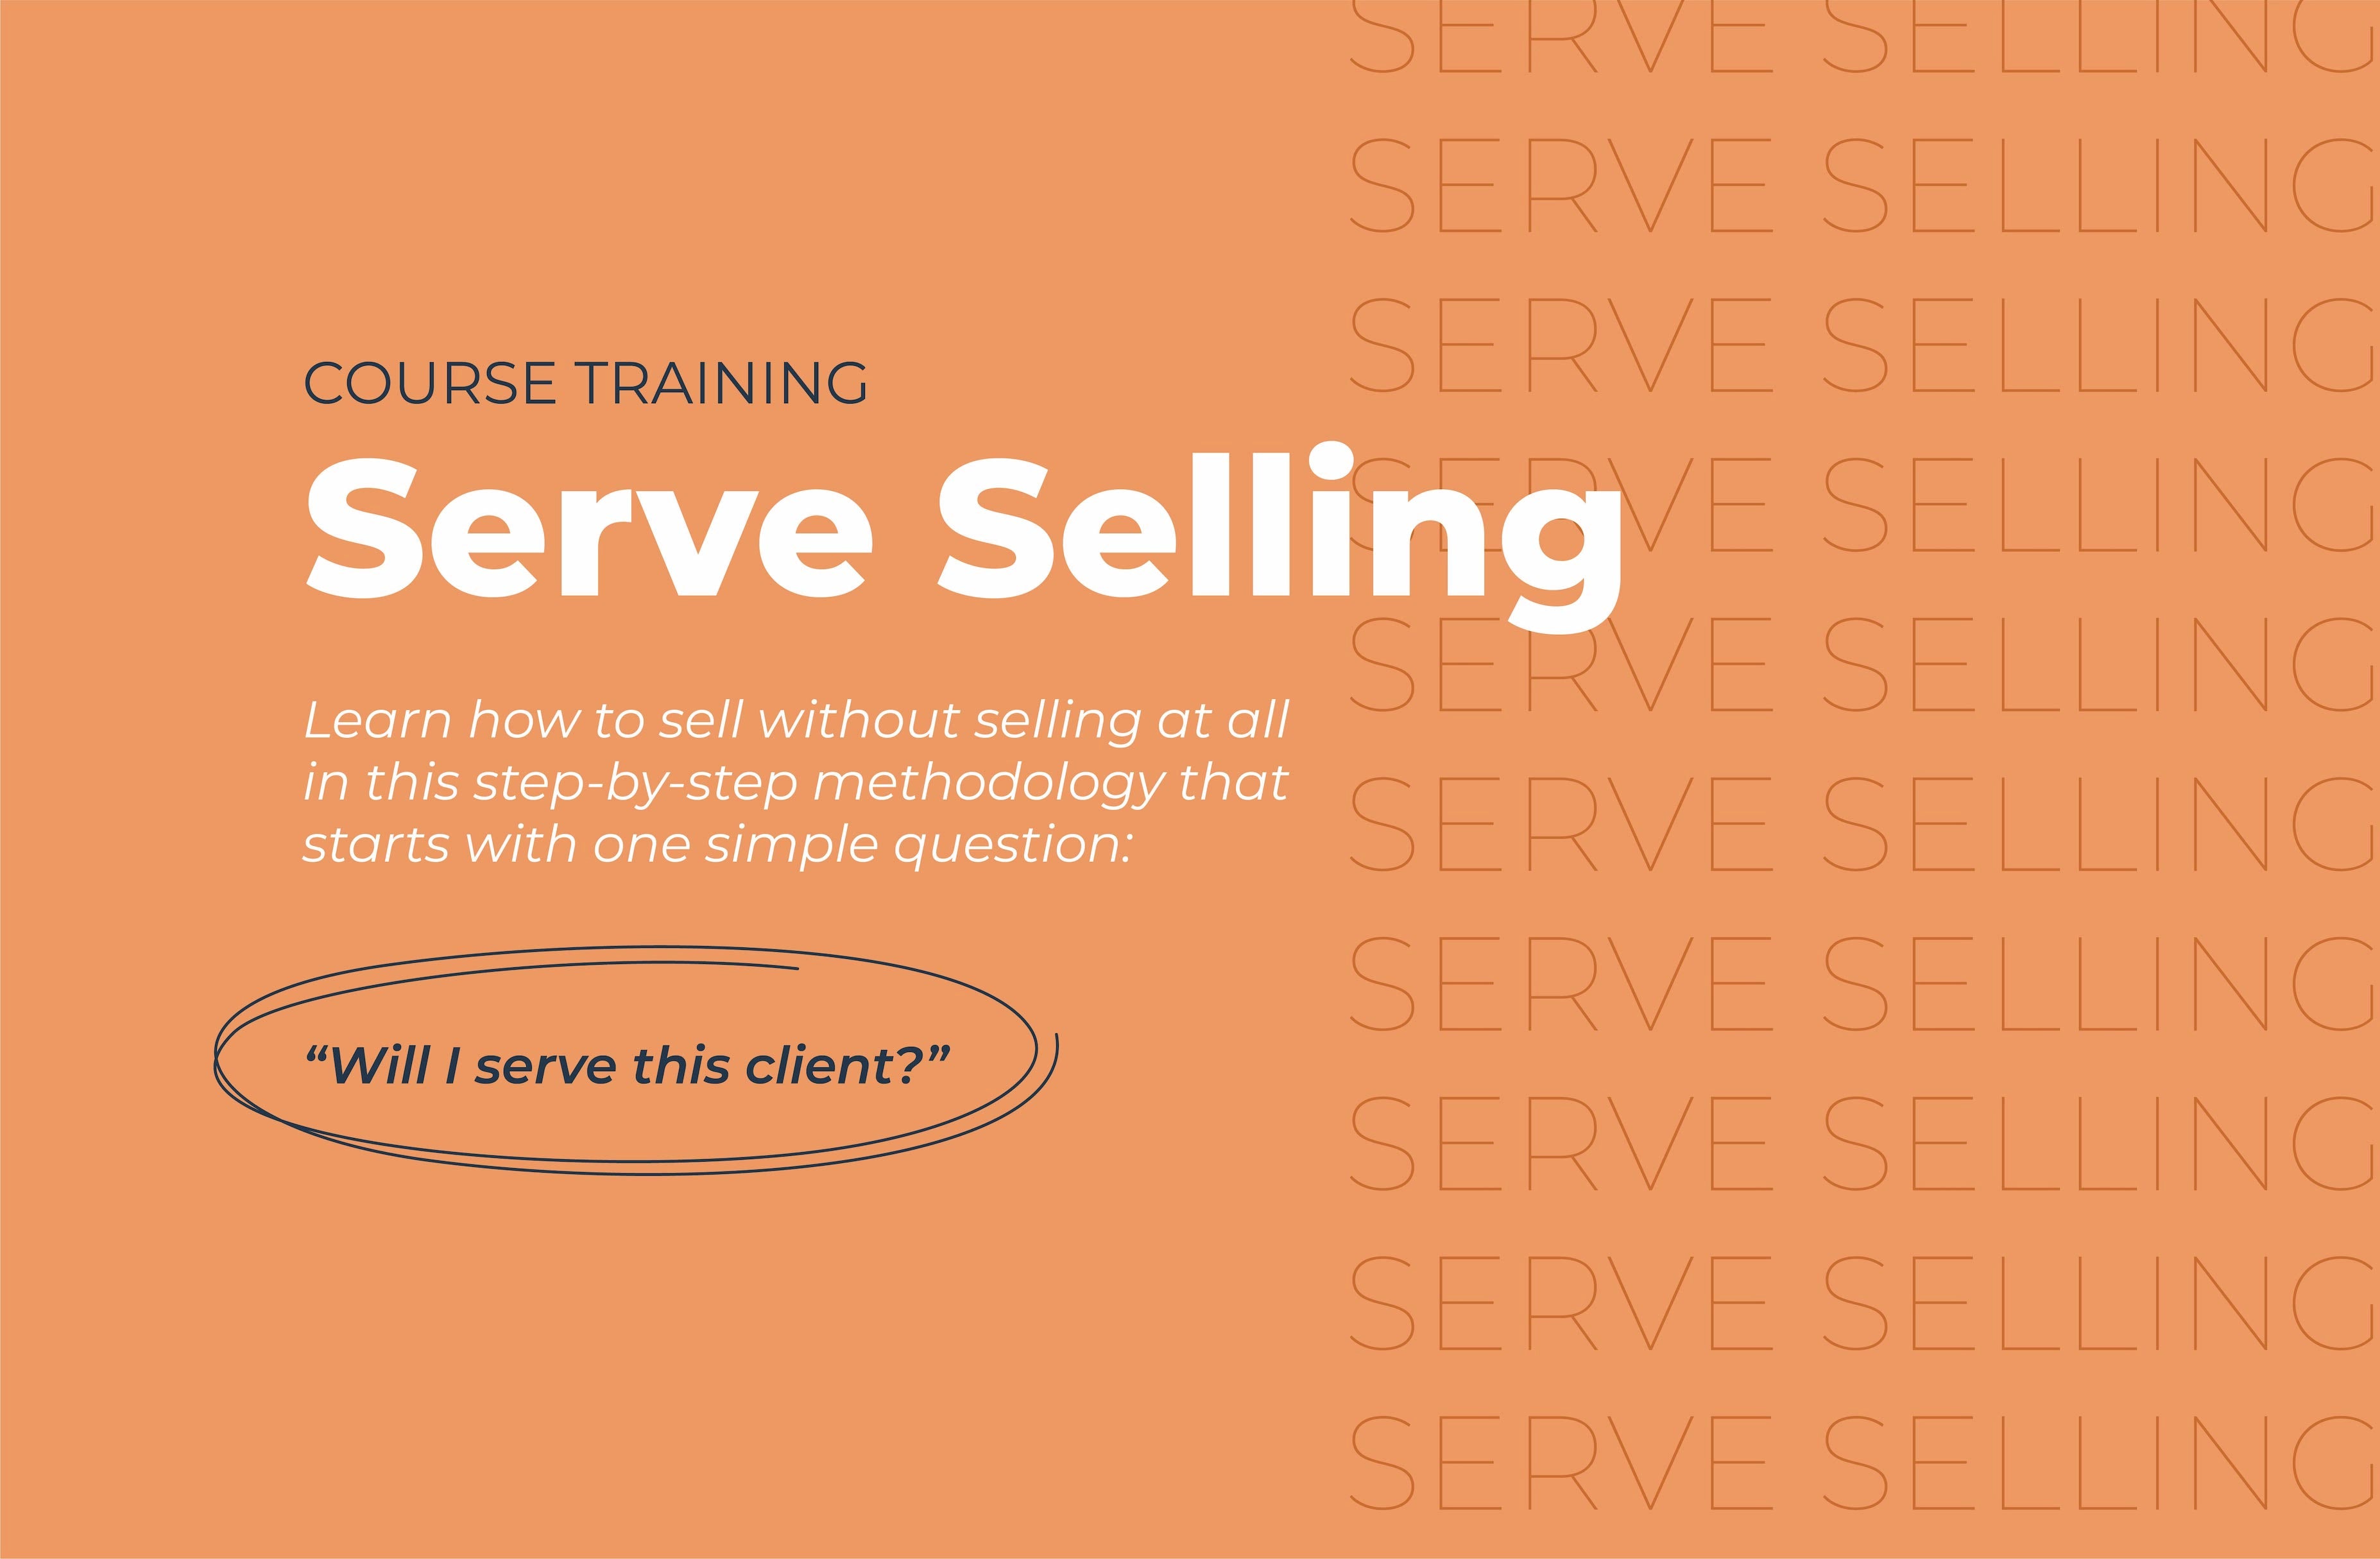 Serve Selling: How to Sell Without Selling at All